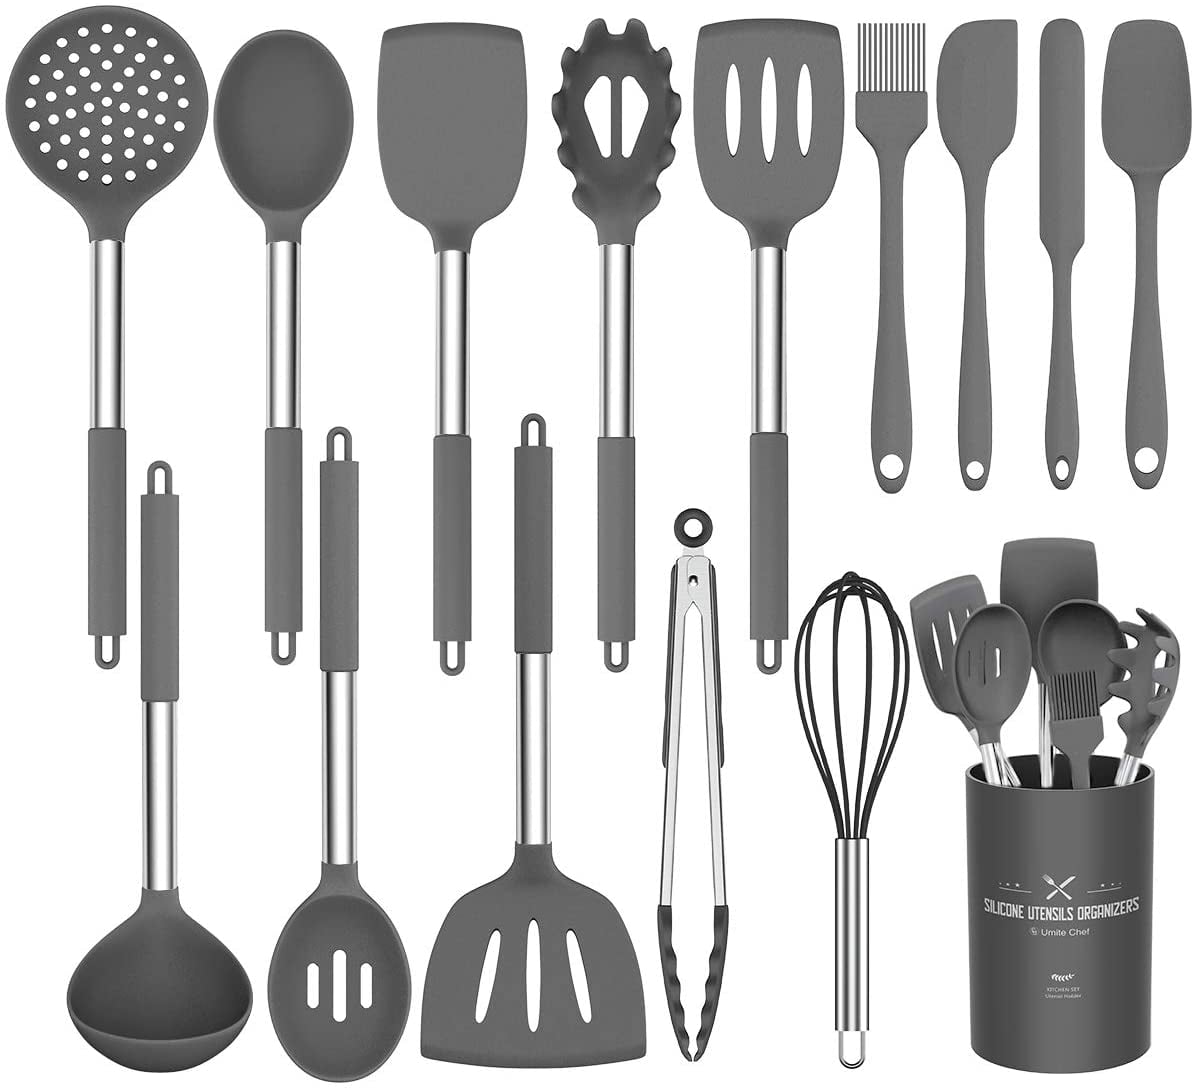 Nonstick Cooking Spatulas Spoon Ladle Serving Tongs Silicone & Stainless Steel Kit Whisk Kitchen Utensil Set Pasta Server Spatula Tools For Pots & Pans Strainer 8 Best Kitchen Utensils 